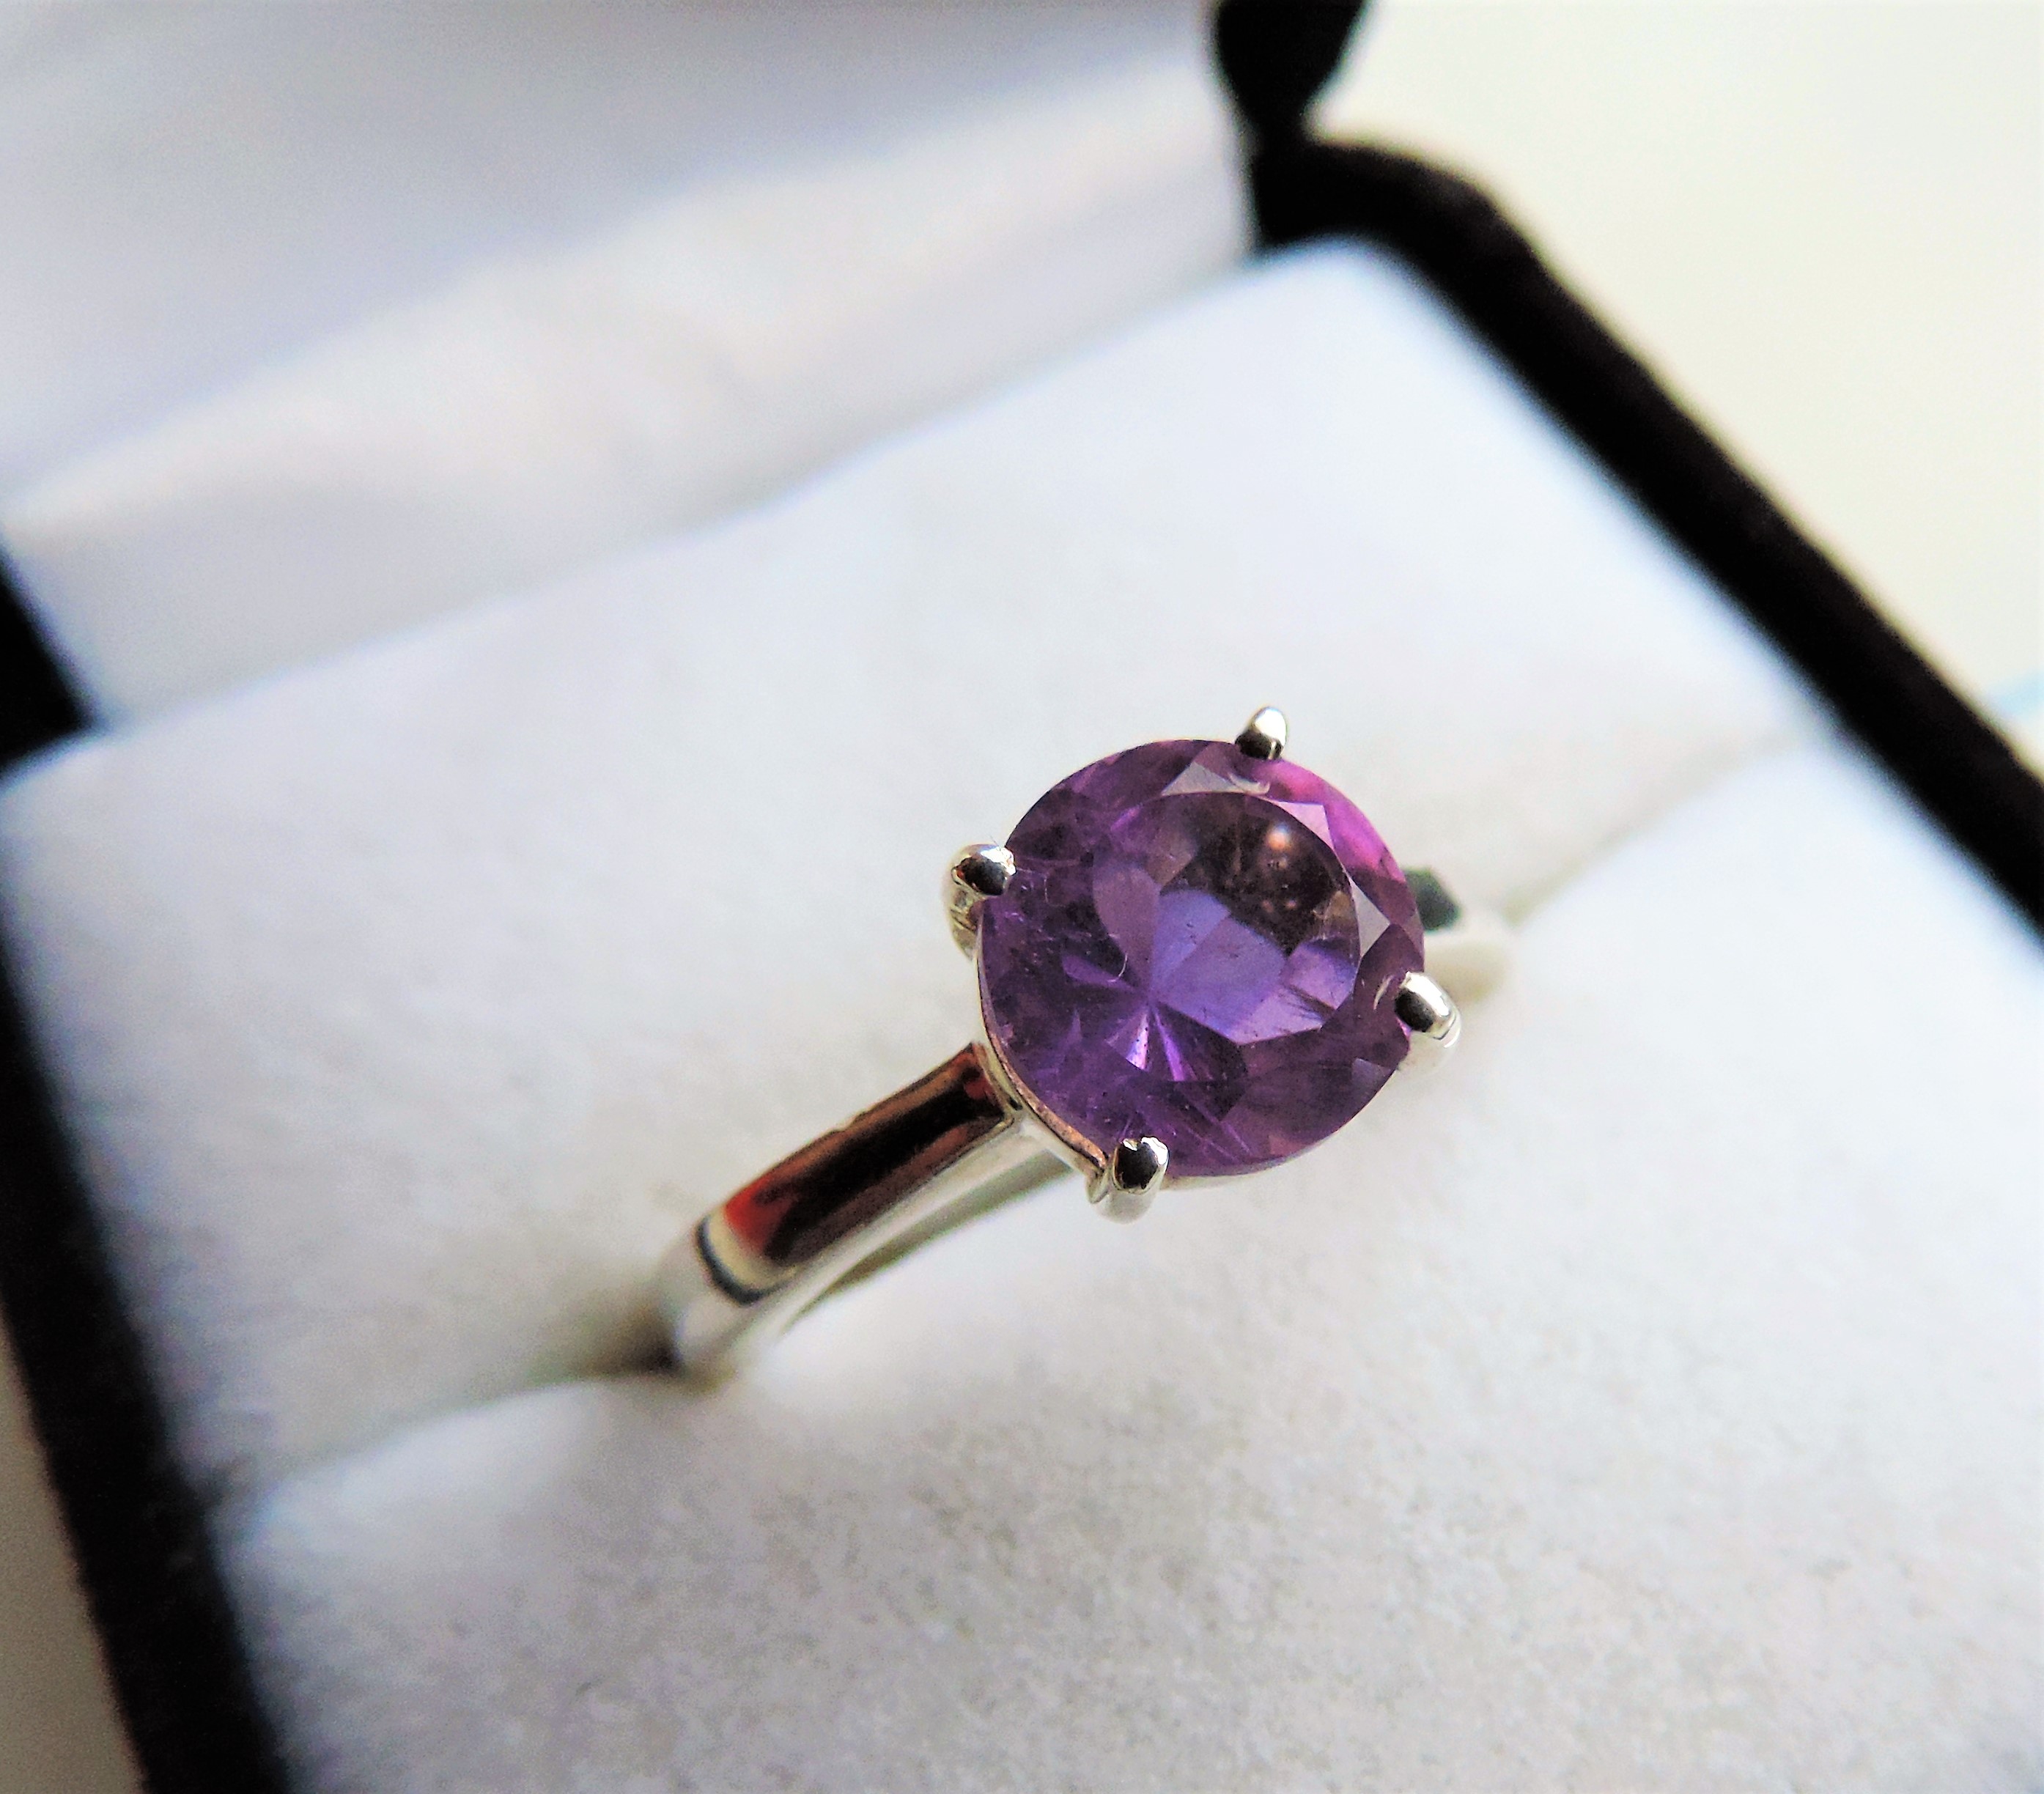 1.8 carat Amethyst Solitaire Ring - Image 2 of 3